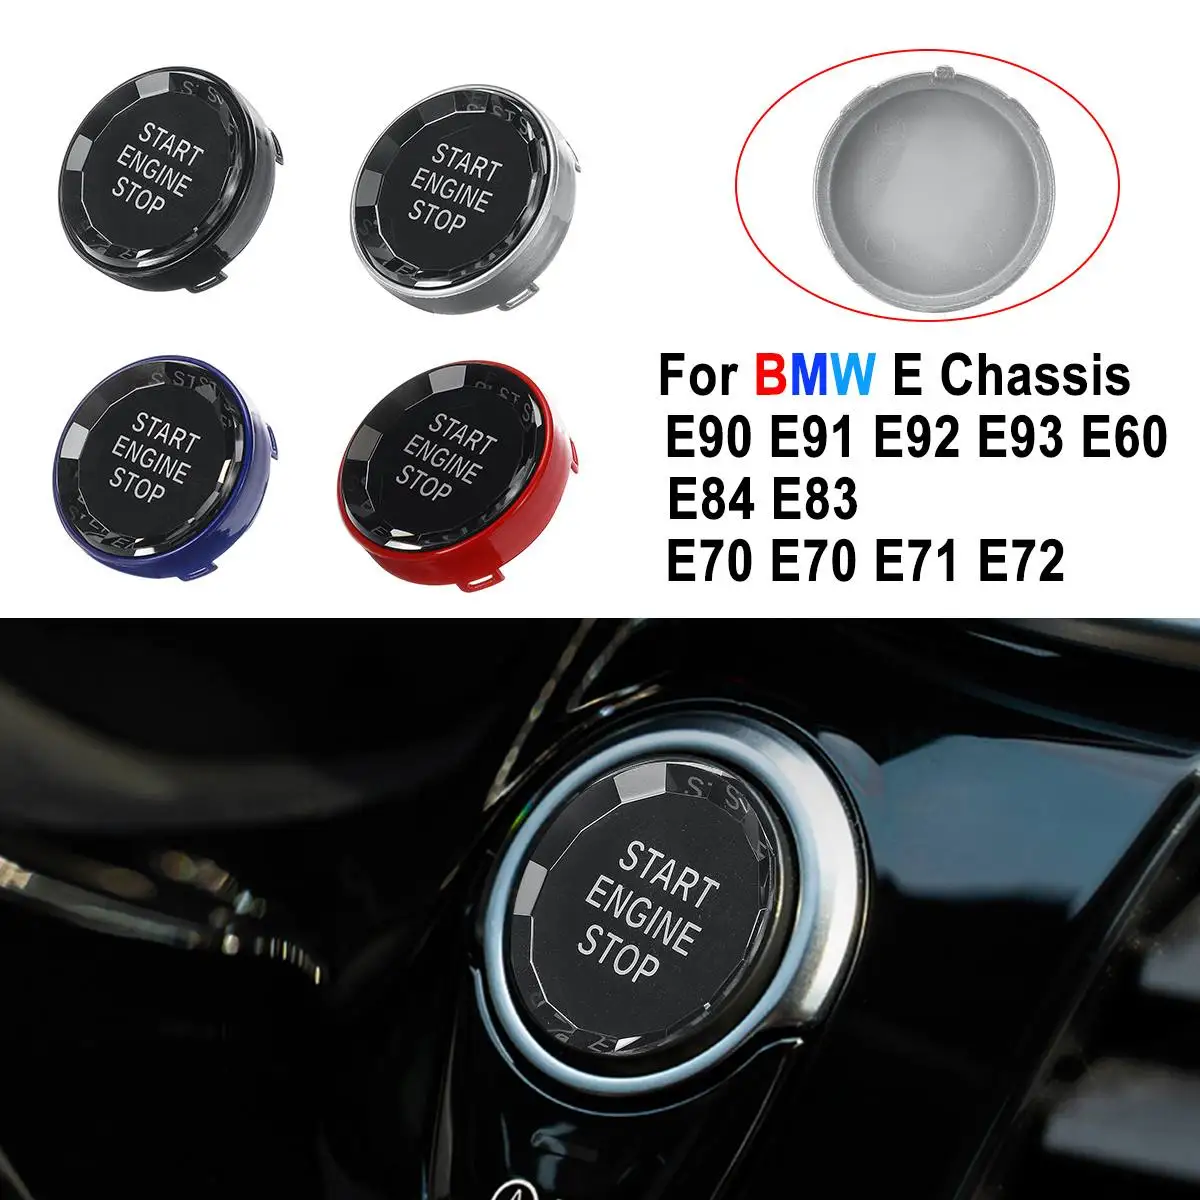 

ENGINE START STOP switch buttons Replace Cover New Car styling For BMW E Chassis E92 E93 E90 E91 E60 E84 E83 E70 E70 E71 E72